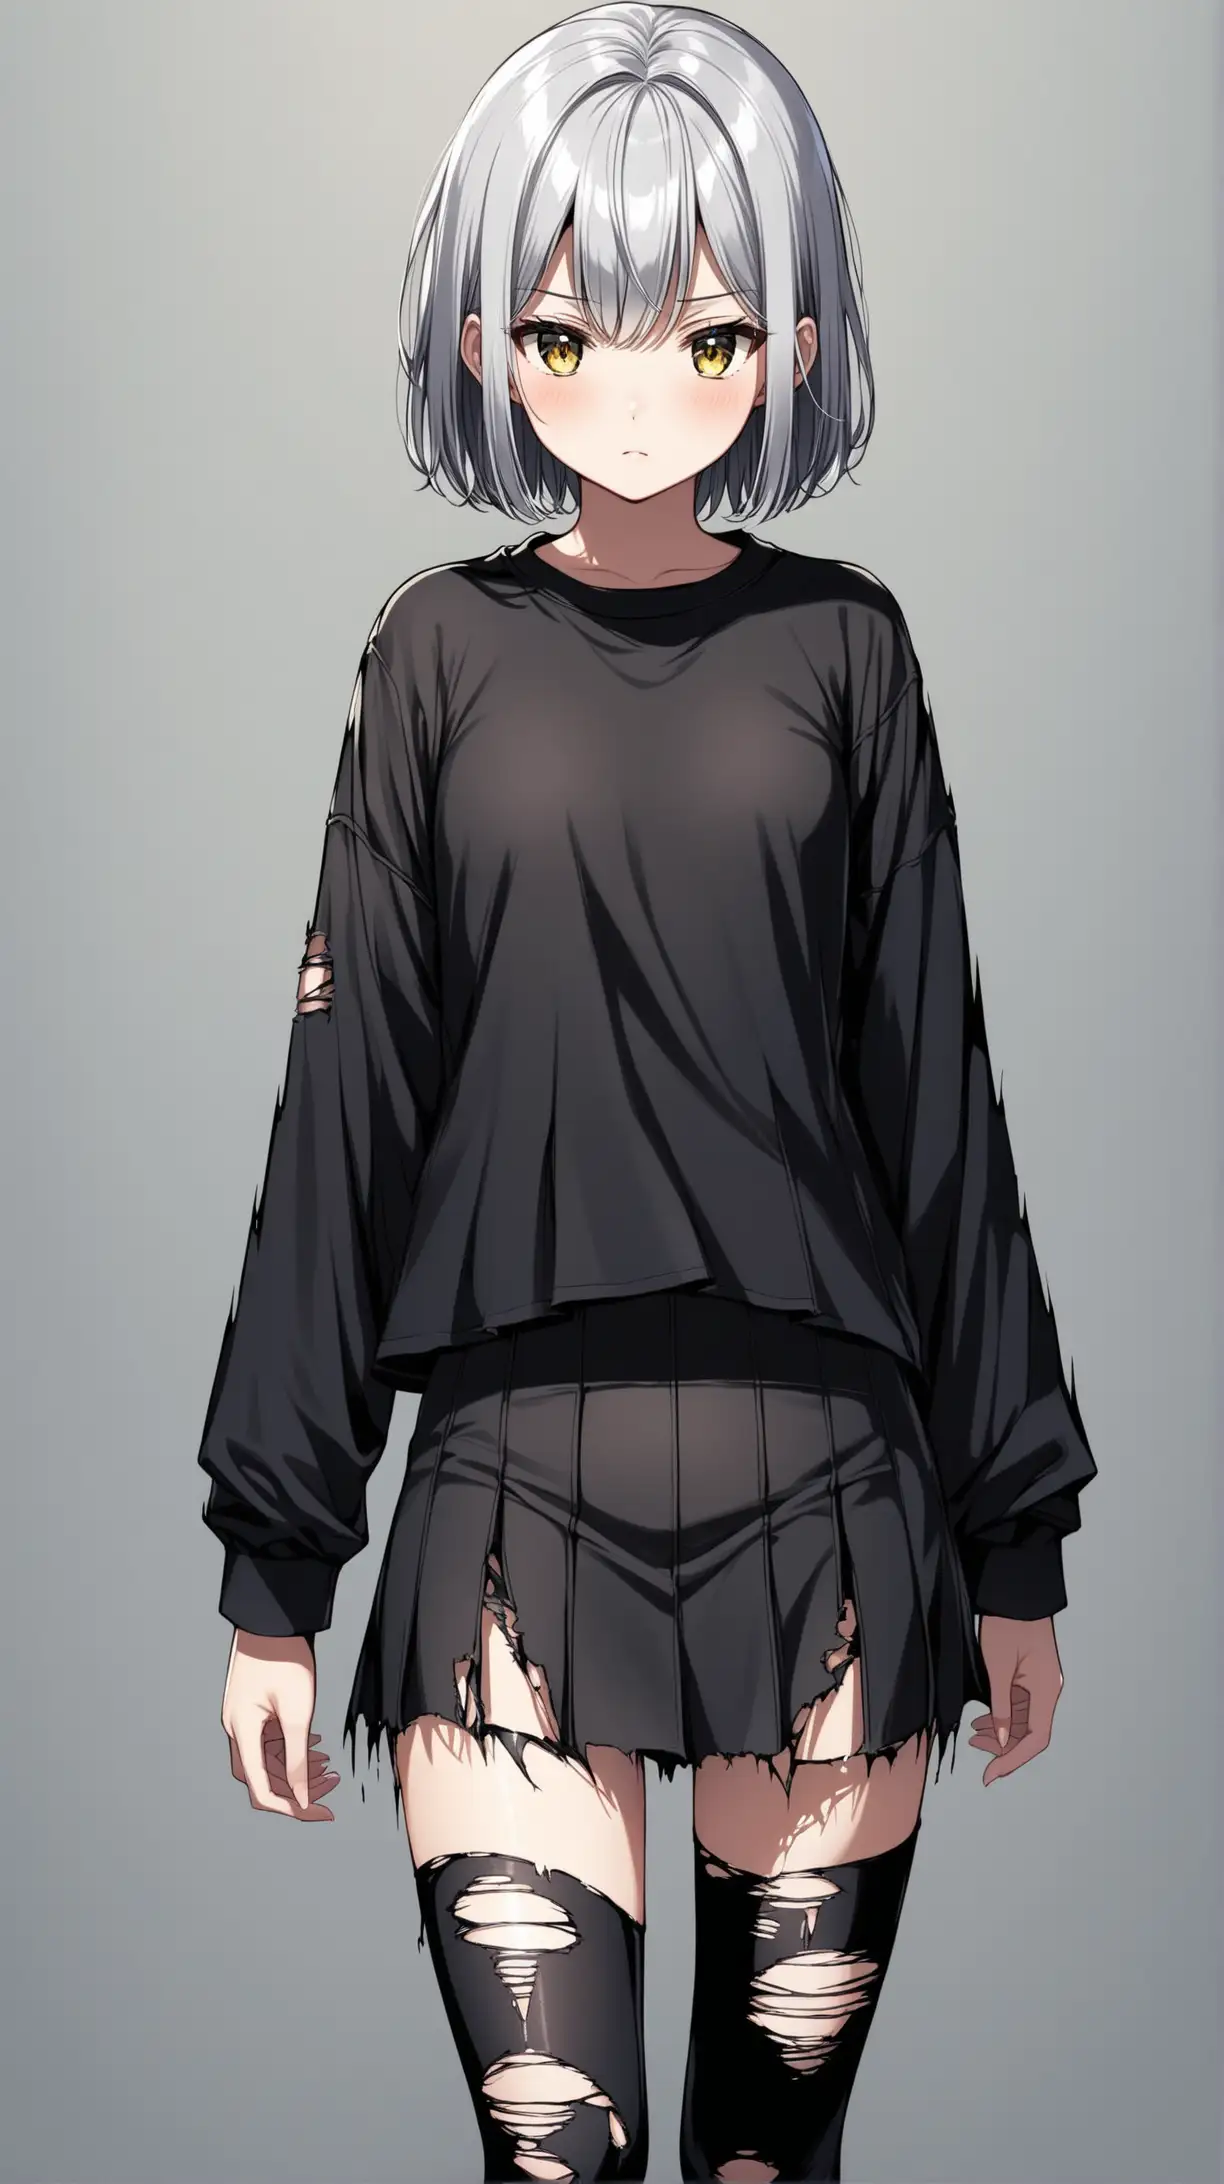 Edgy High School Girl with Silver Hair and Torn Leggings in Dark Attire